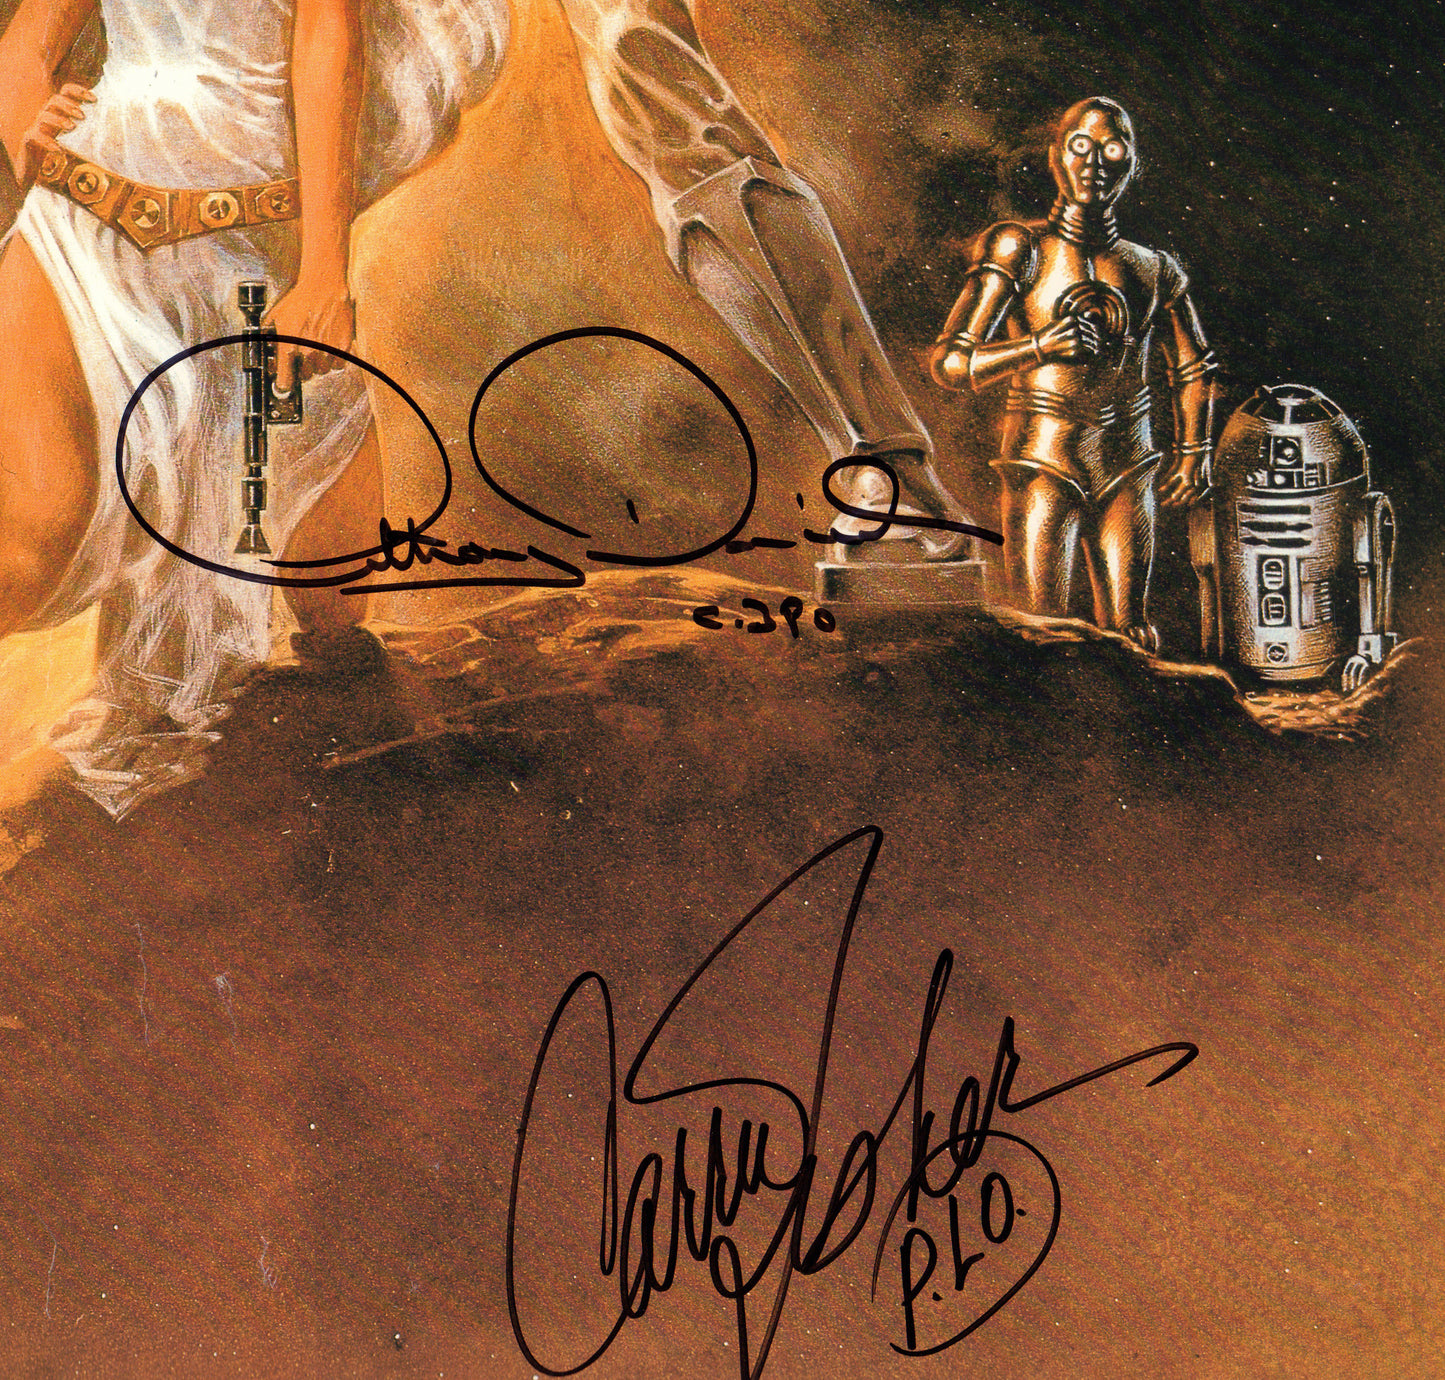 
                  
                    Star Wars: A New Hope 27x40 Poster Signed by Harrison Ford, Carrie Fisher, Mark Hamill, Peter Mayhew, Anthony Daniels, & Dave Prowse
                  
                